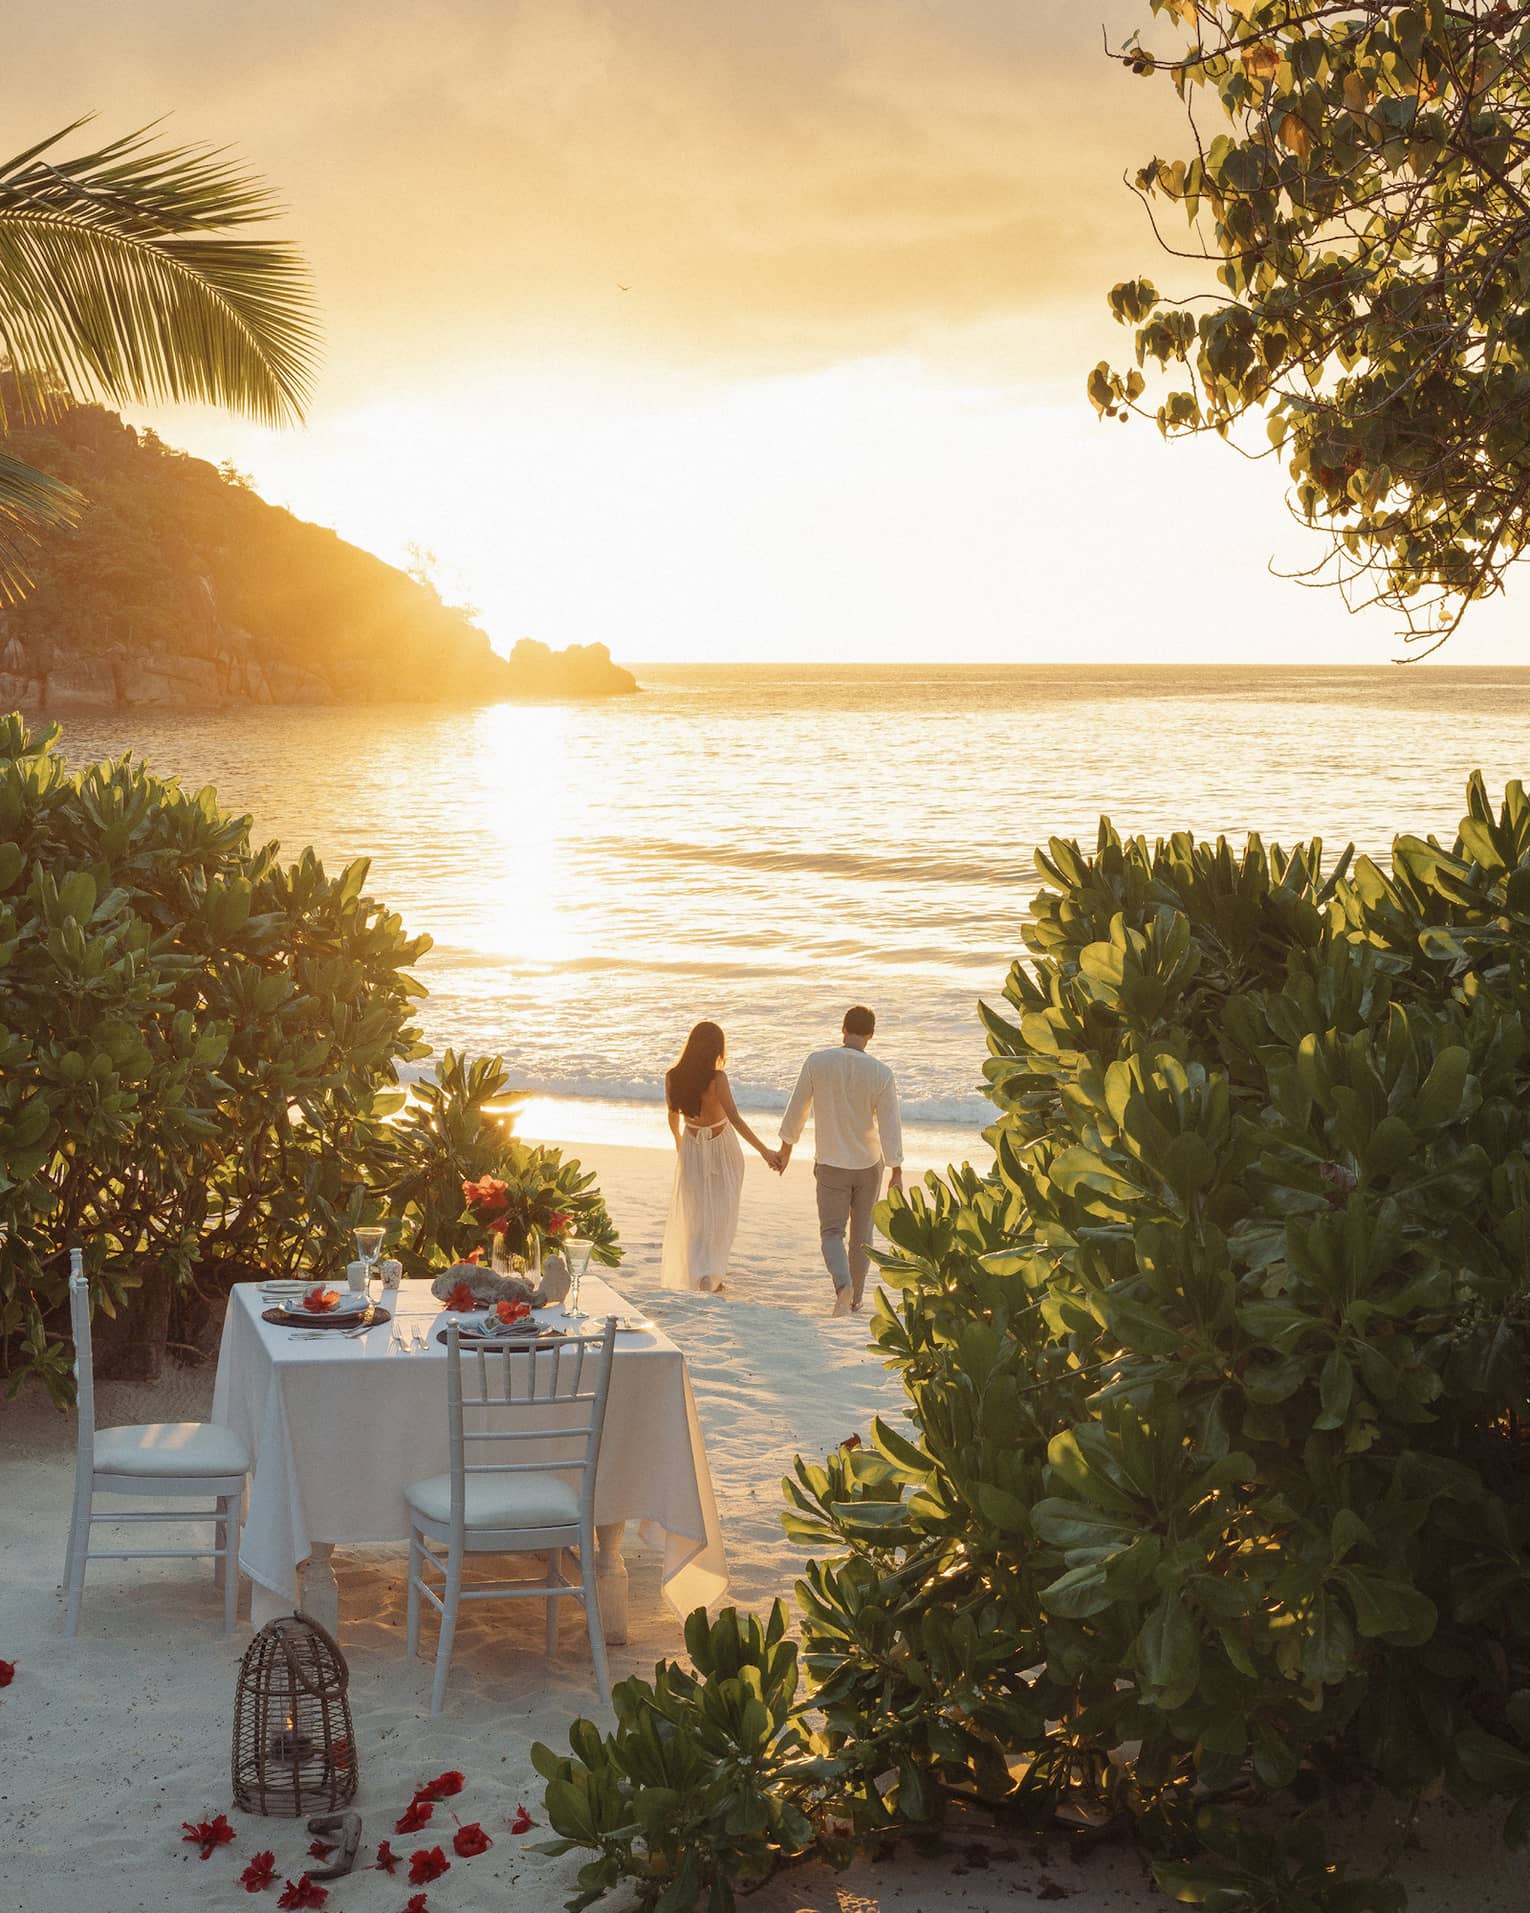 Framed by trees, a romantic dinner table set for two on the beach; a couple holding hands walks in the golden glow of sunset.